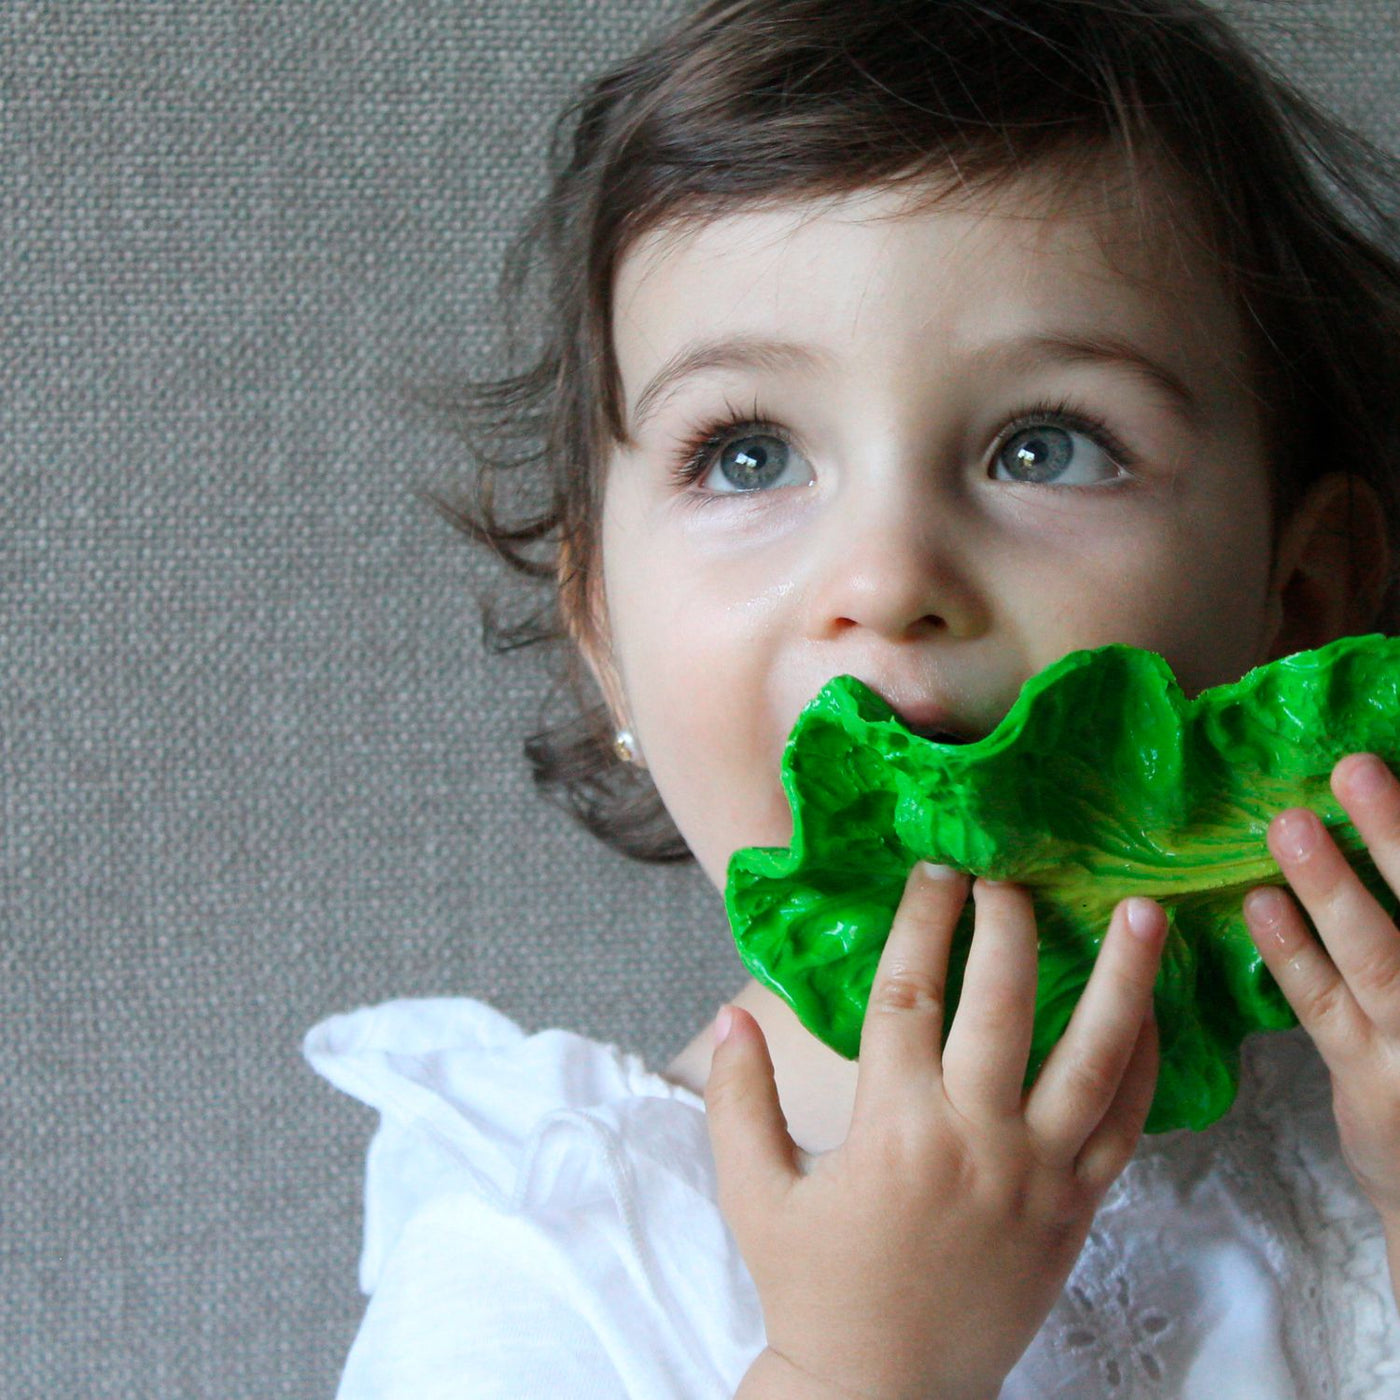 Kendall The Kale Natural Rubber Teether | Oli & Carol